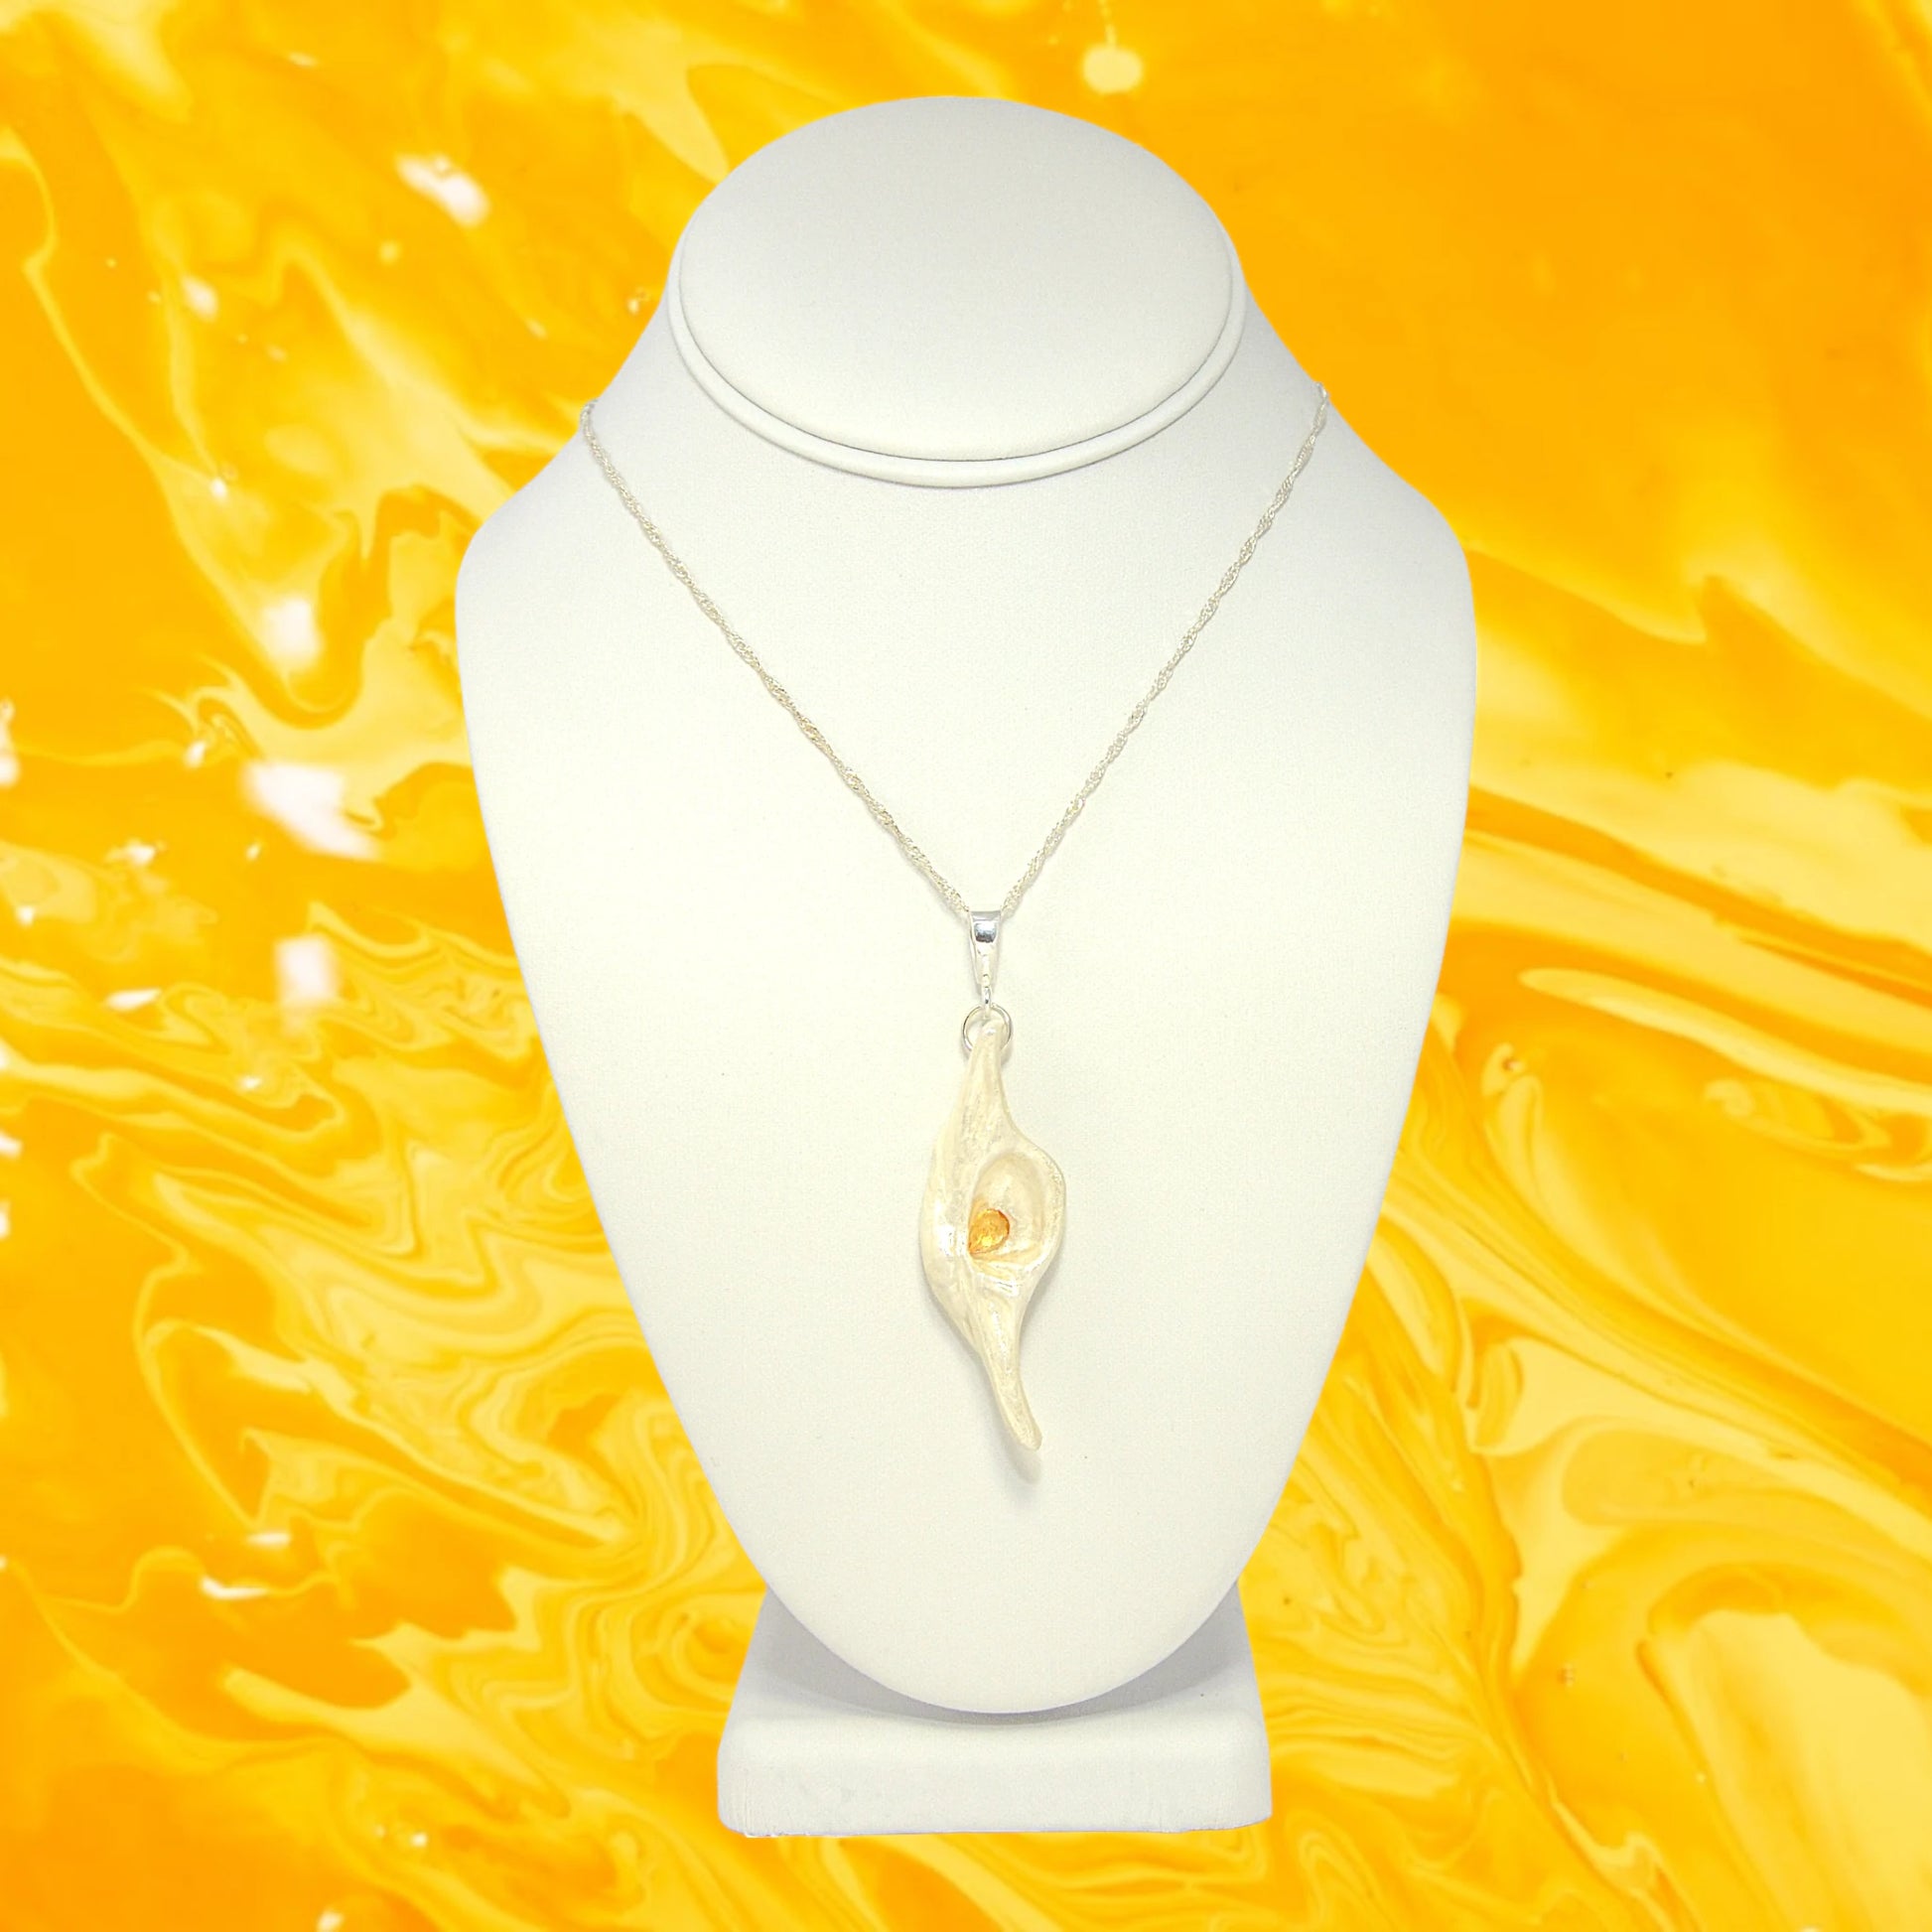 Lightmaker natural seashell pendant A beautiful pear shaped rose cut Citrine compliments the pendant. the pendant is shown hanging on a white necklace displayer with a yellow background,